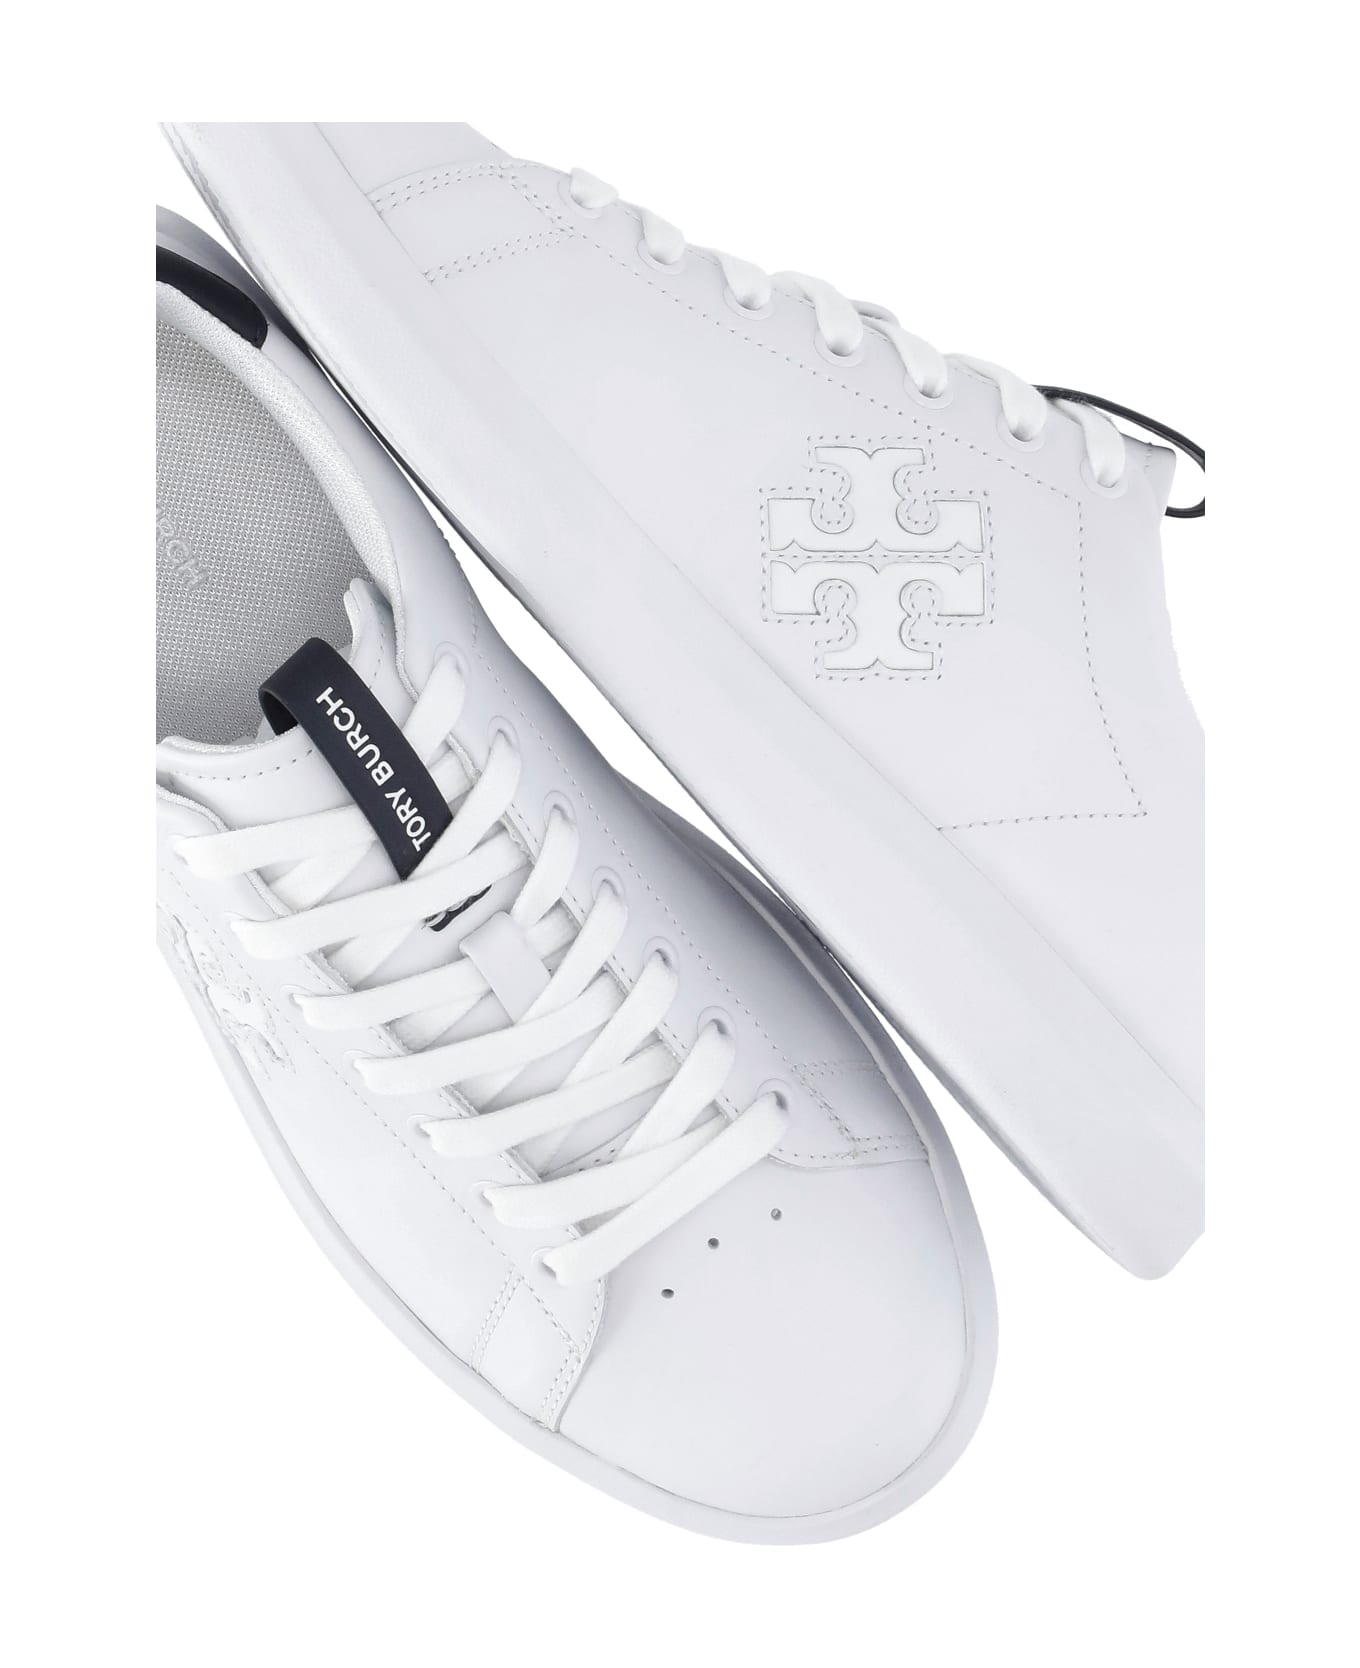 Tory Burch Howell Court Sneakers With Double T - White スニーカー